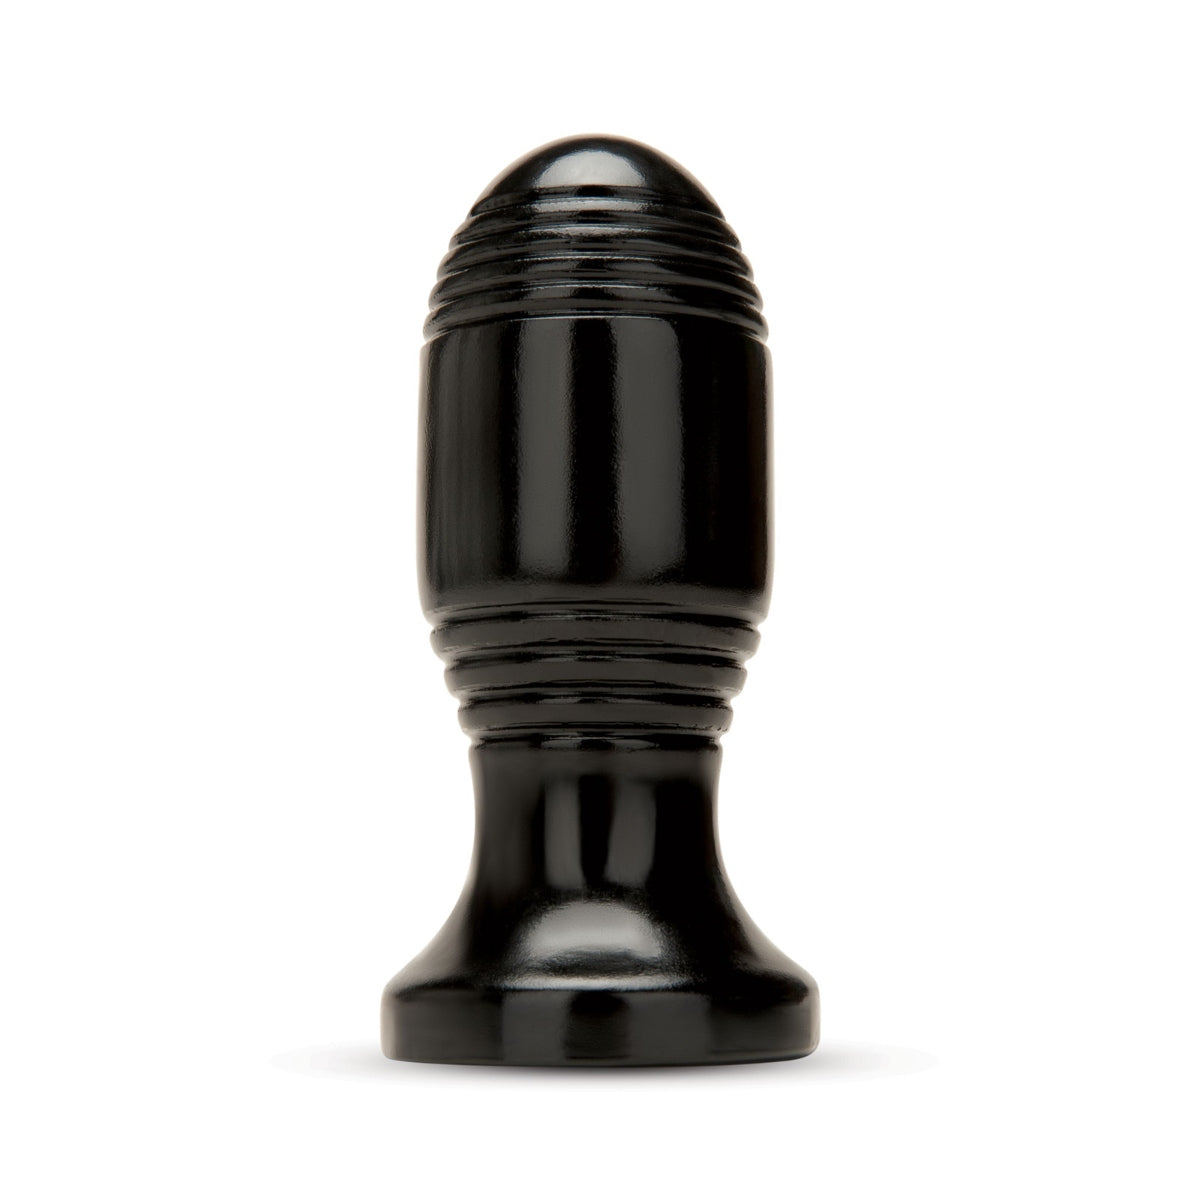 Prowler RED Ribbed Butt Plug Black